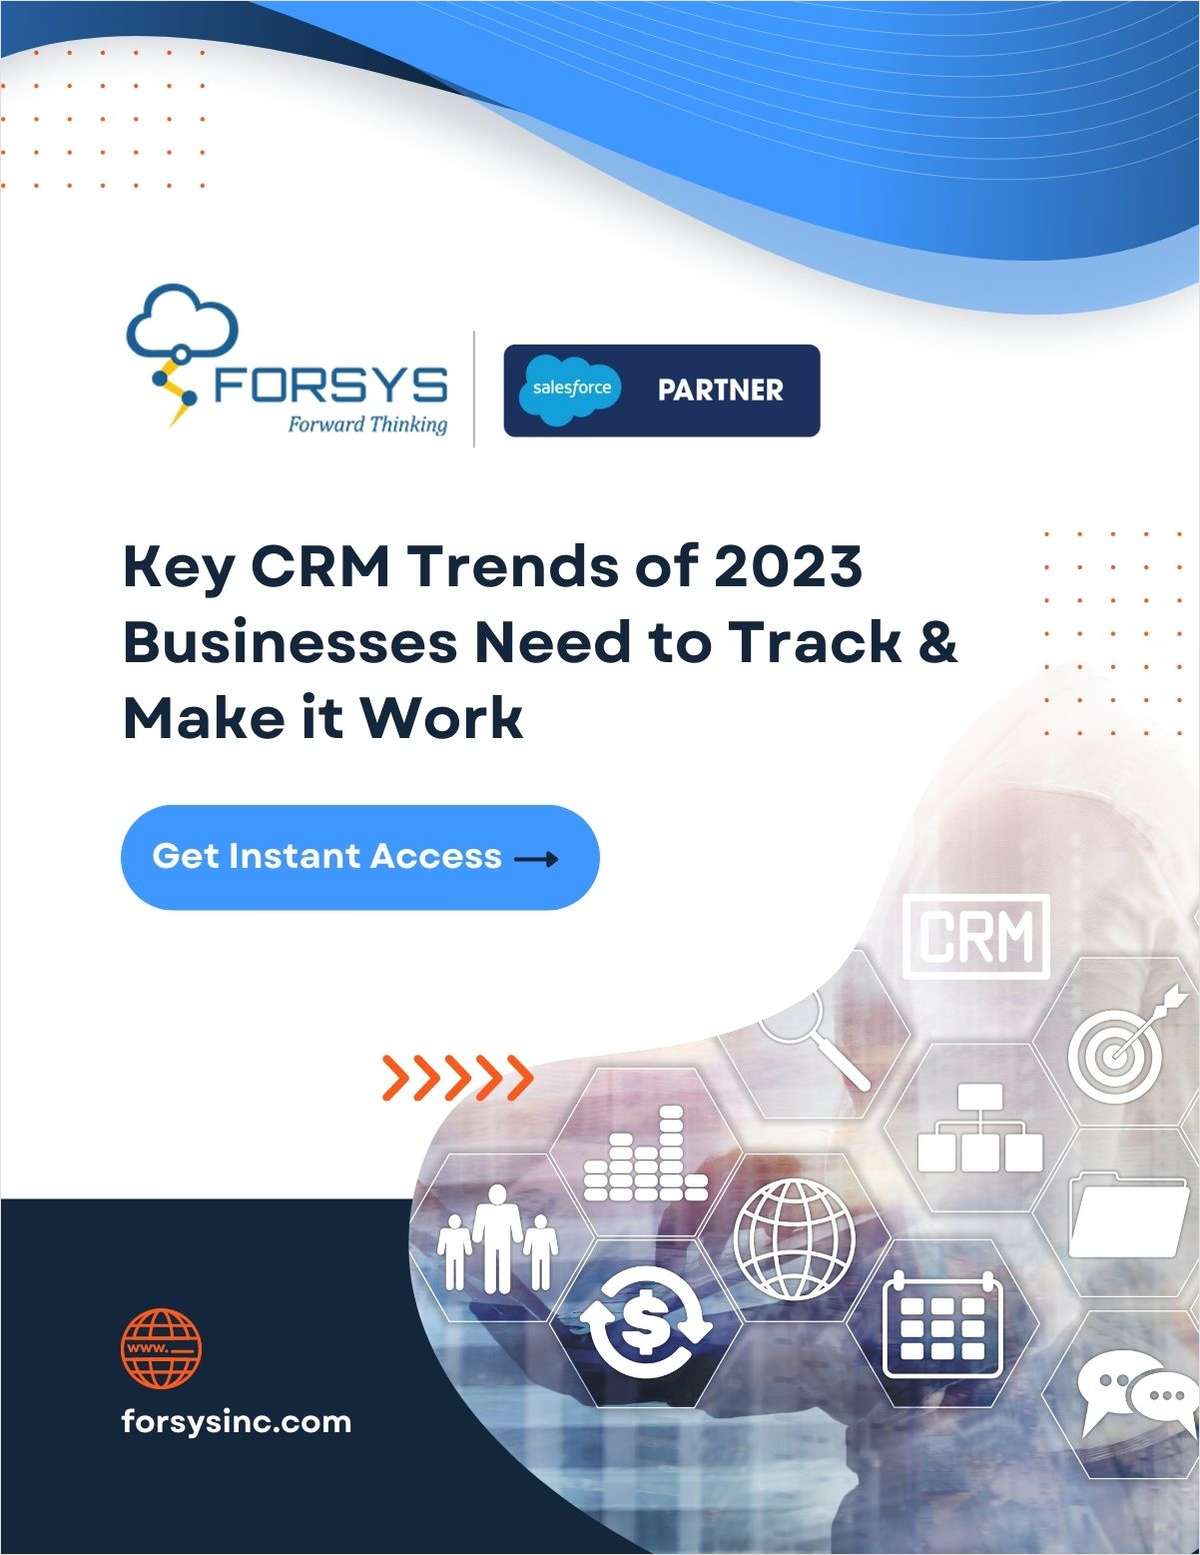 Key CRM Trends of 2023 Businesses Need to Track & Make it Work